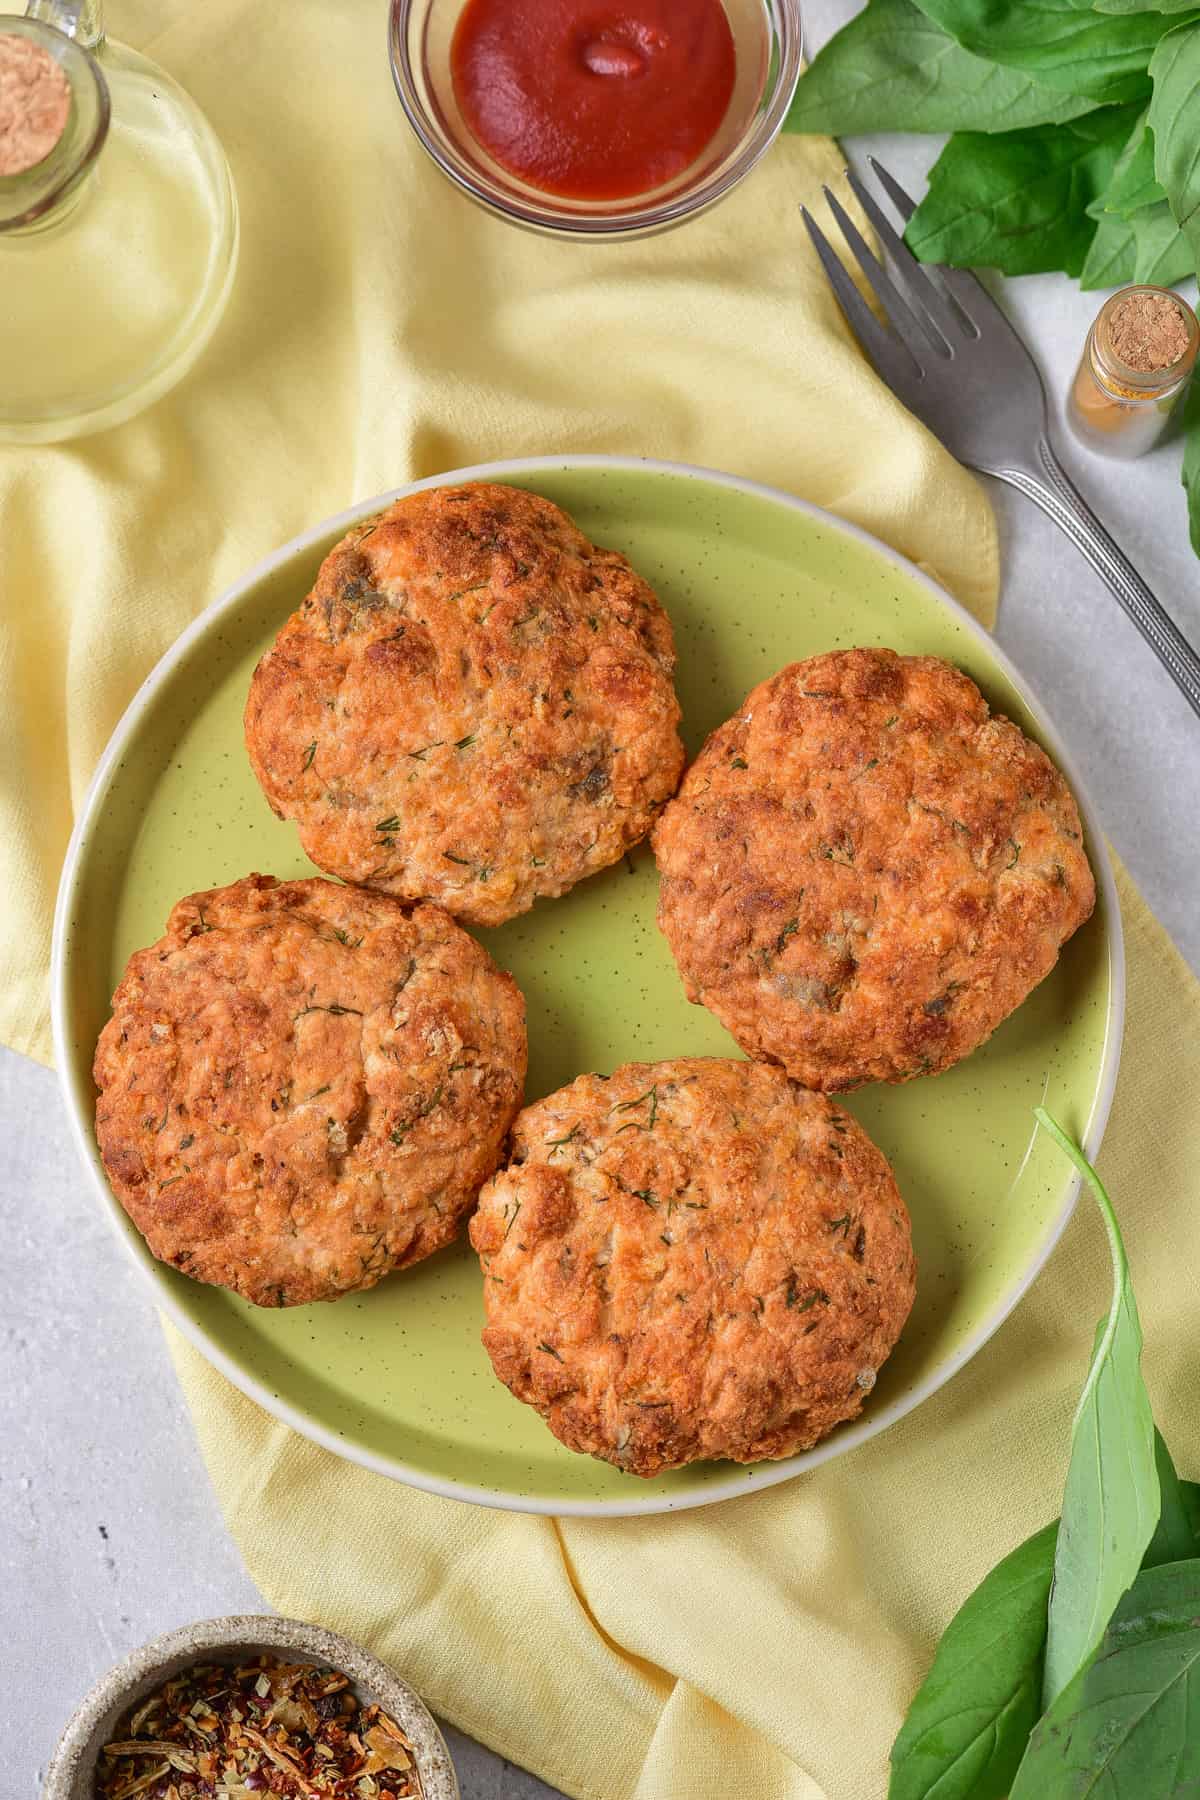 Plate with four cooked salmon patties.